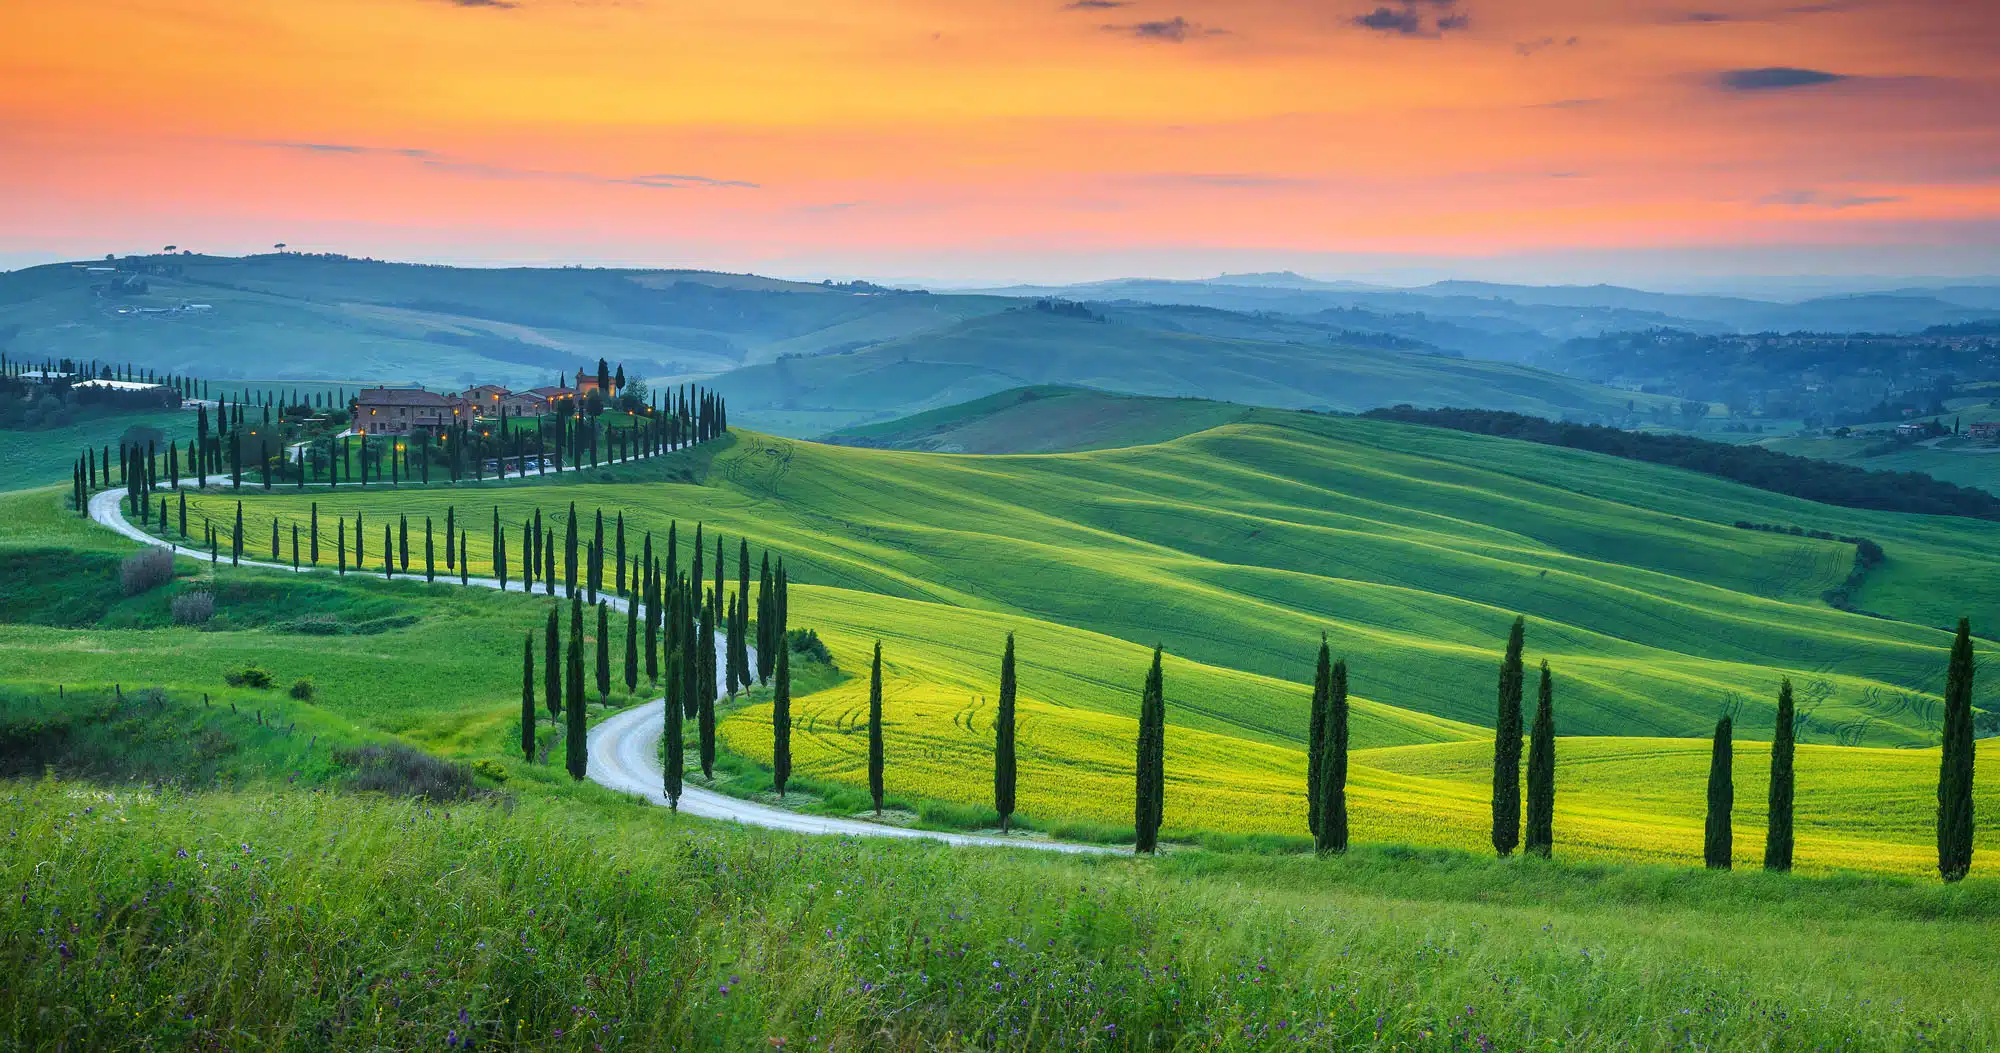 Featured image for “Tuscany Bucket List: 22 Best Things to Do in Tuscany”